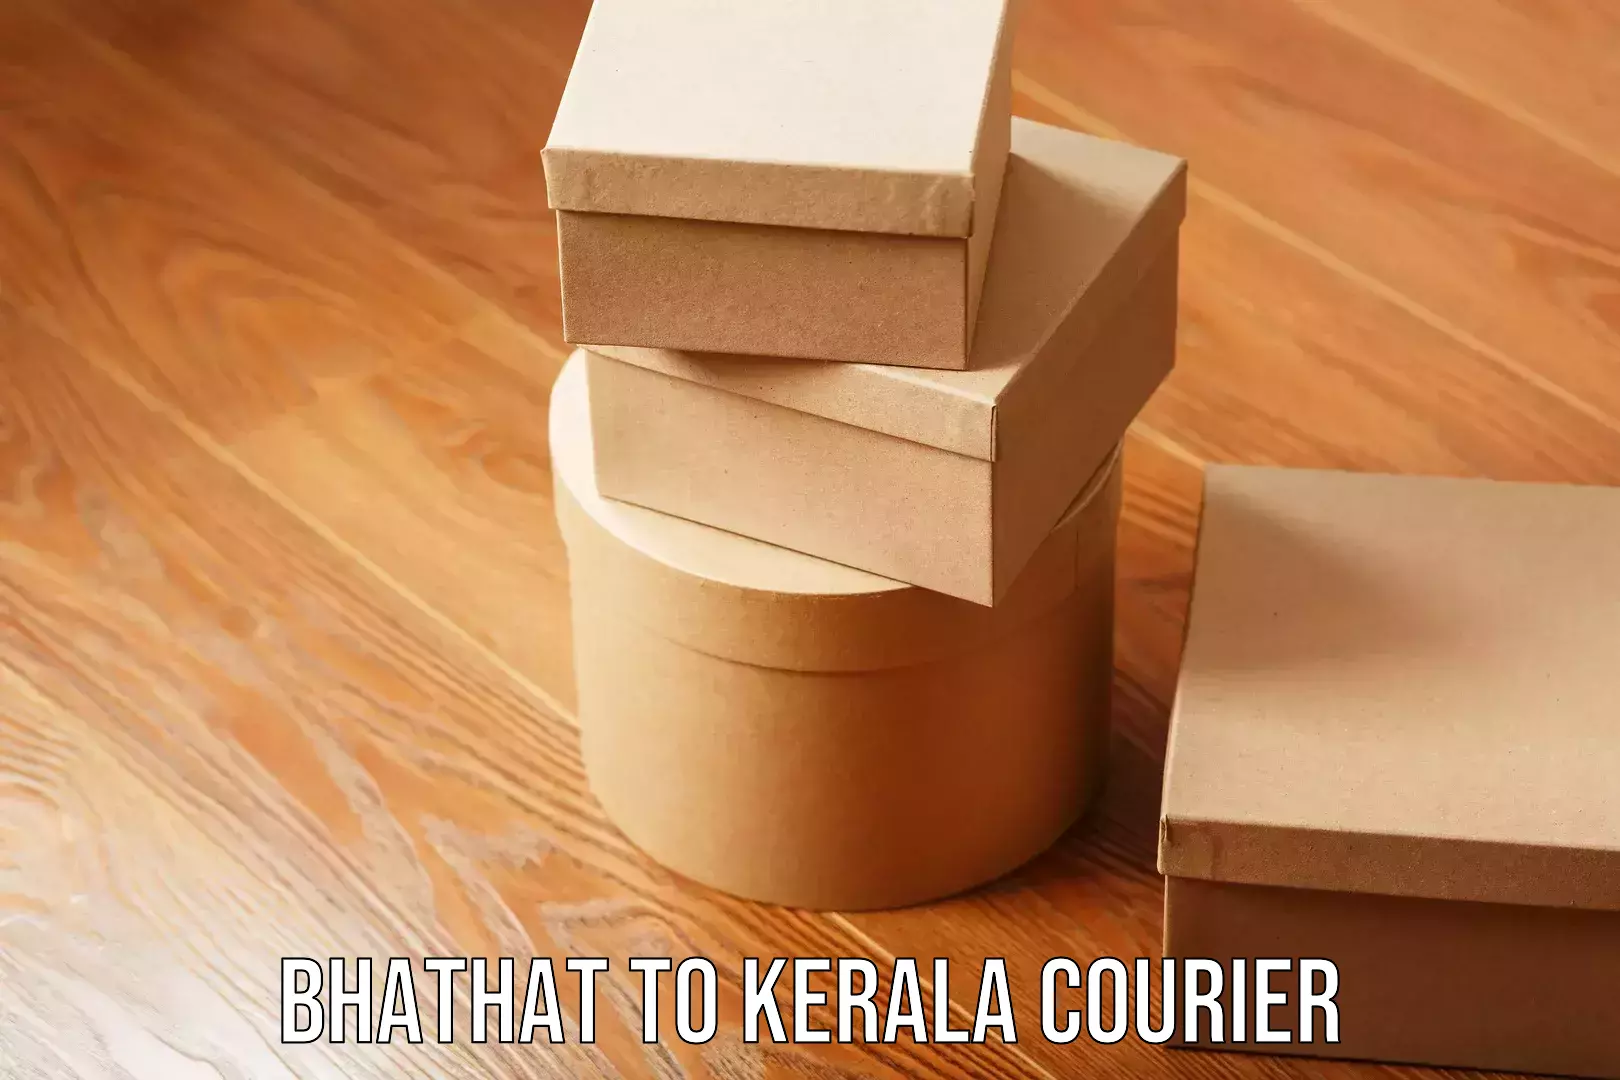 E-commerce logistics support Bhathat to Kerala